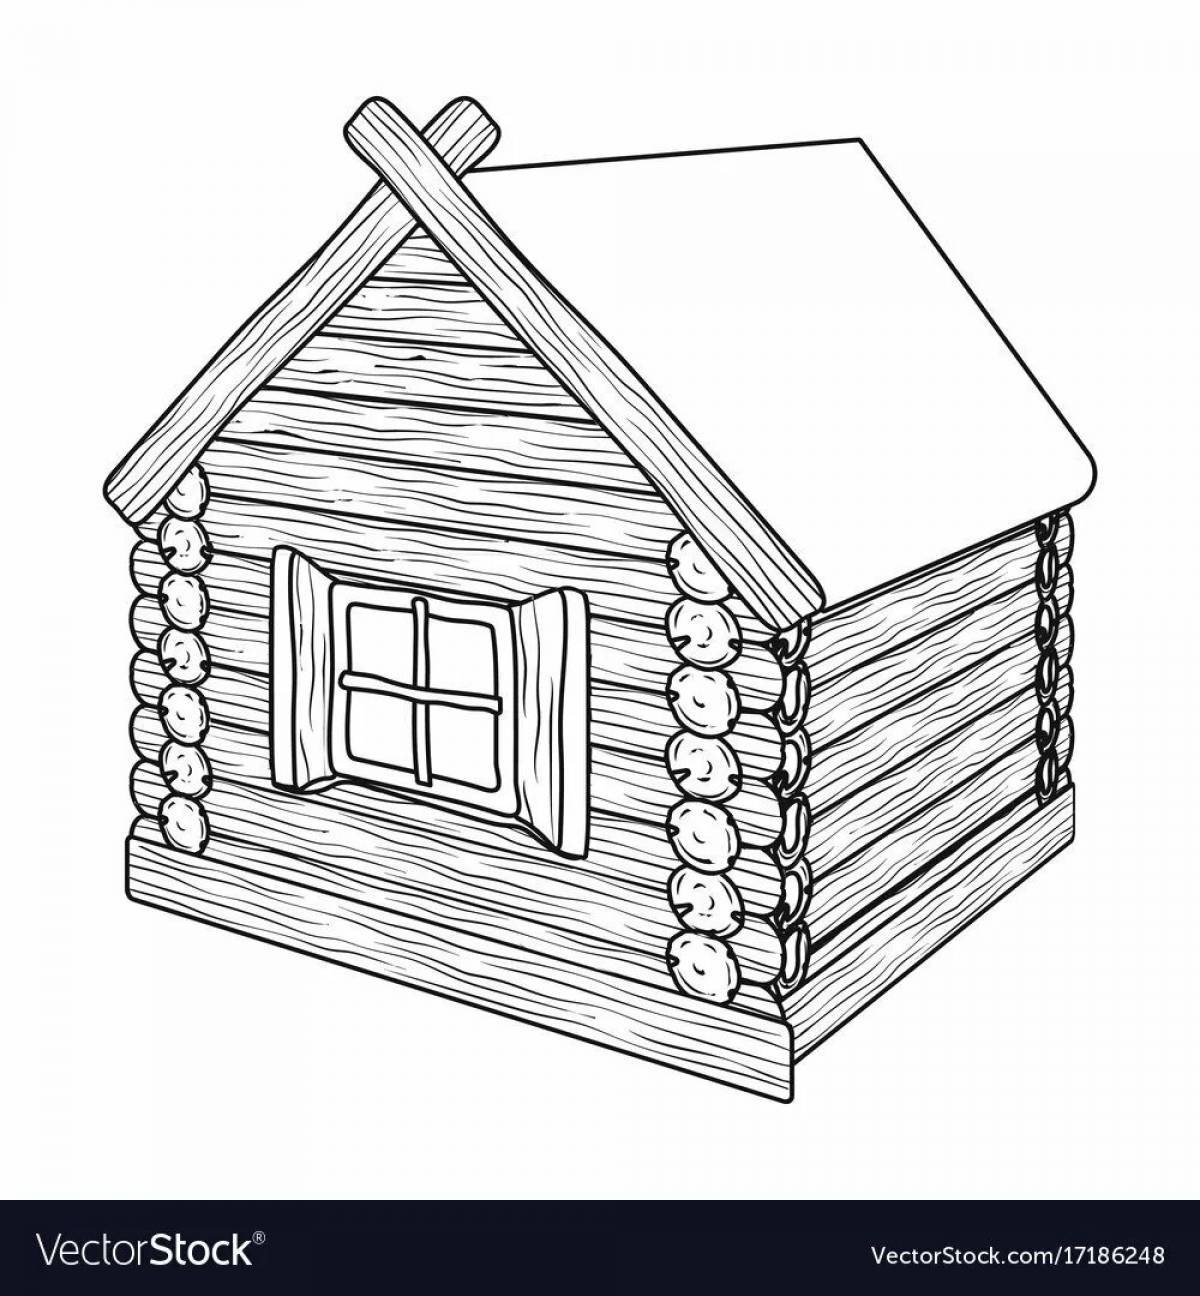 Charming wooden hut coloring book